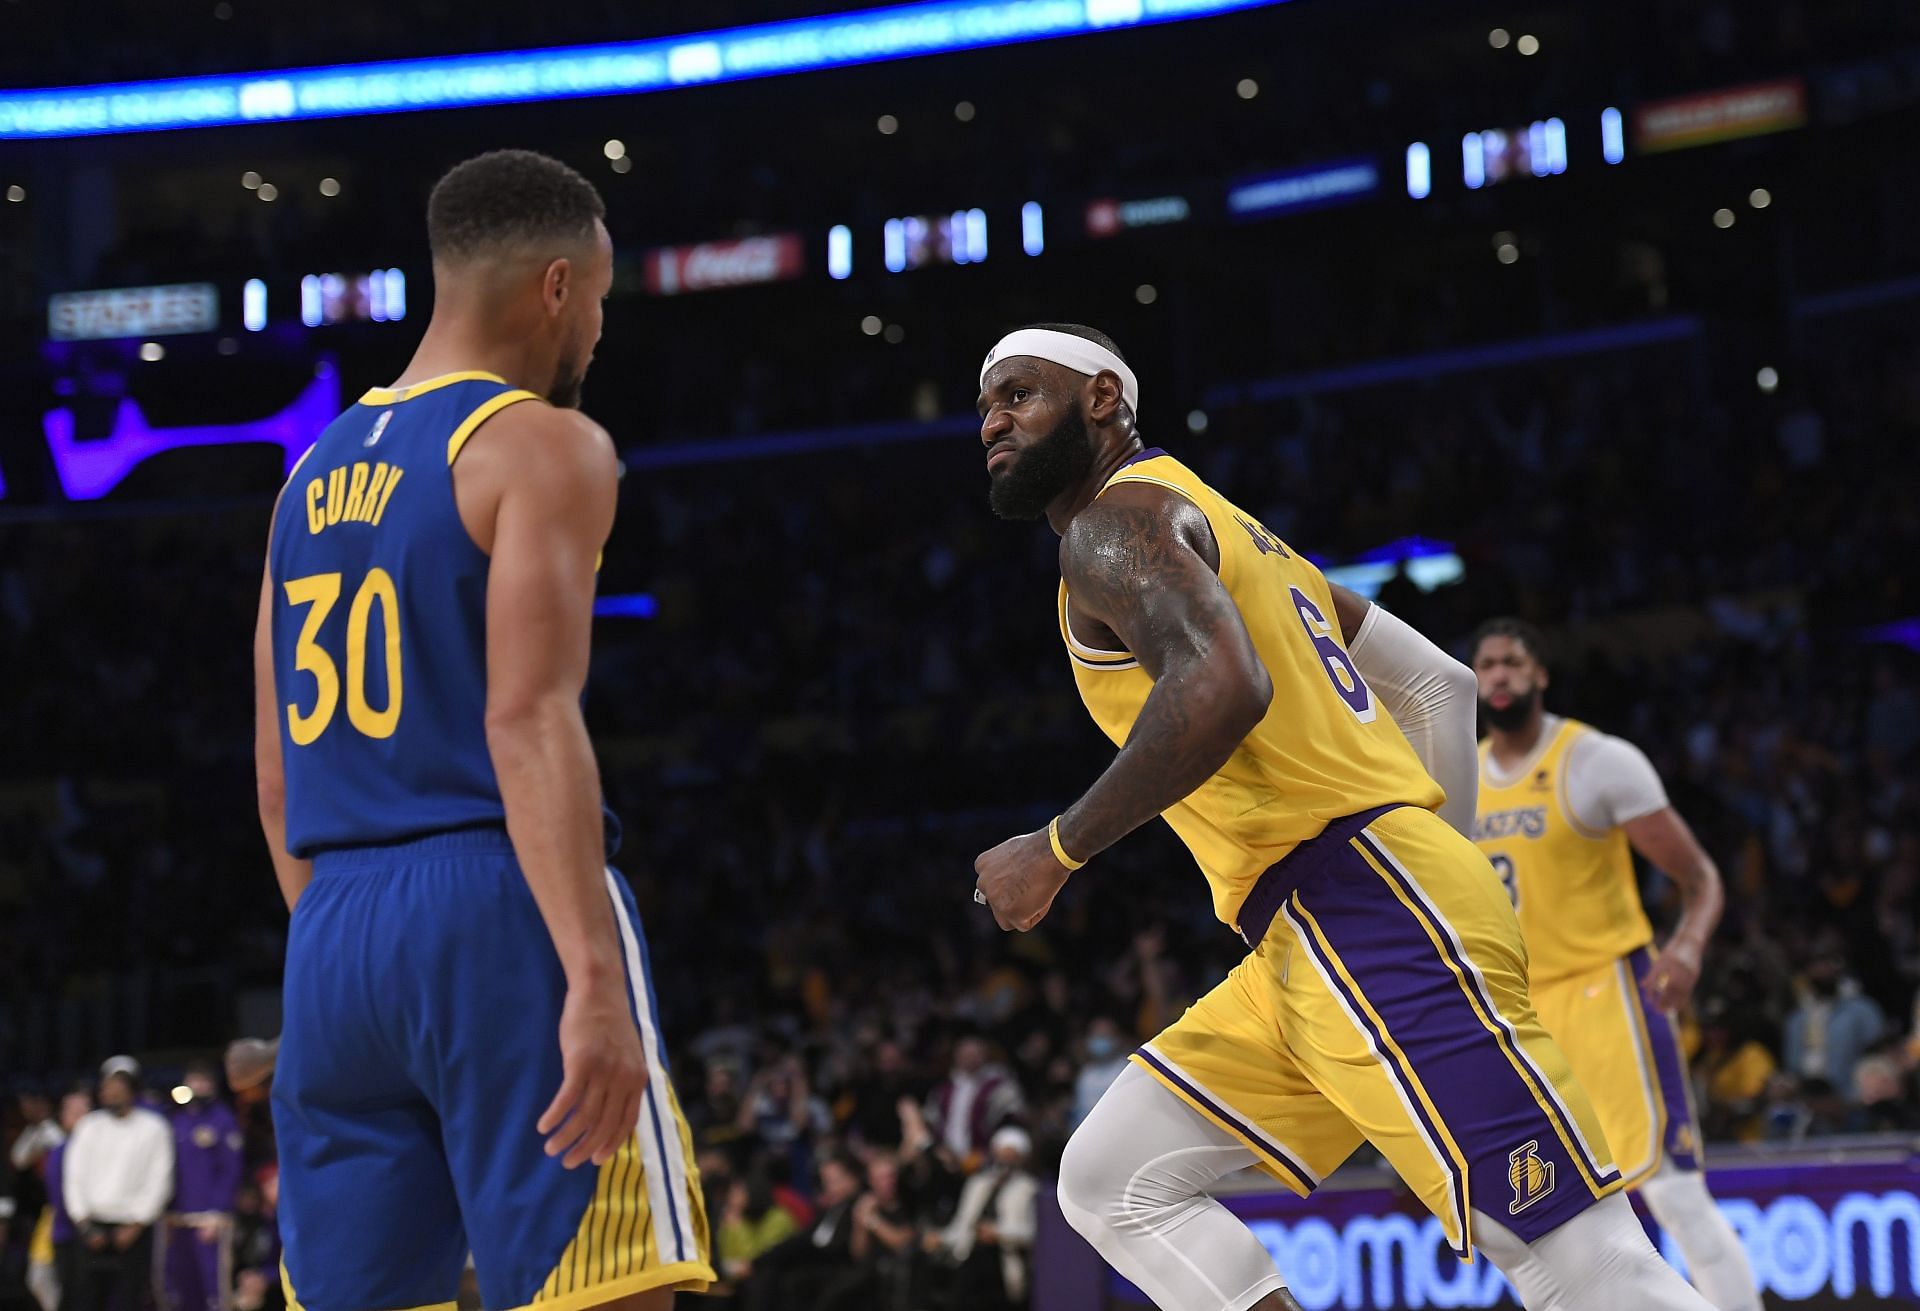 LeBron James of the LA Lakers against Steph Curry of the Golden State Warriors on 2021 opening day